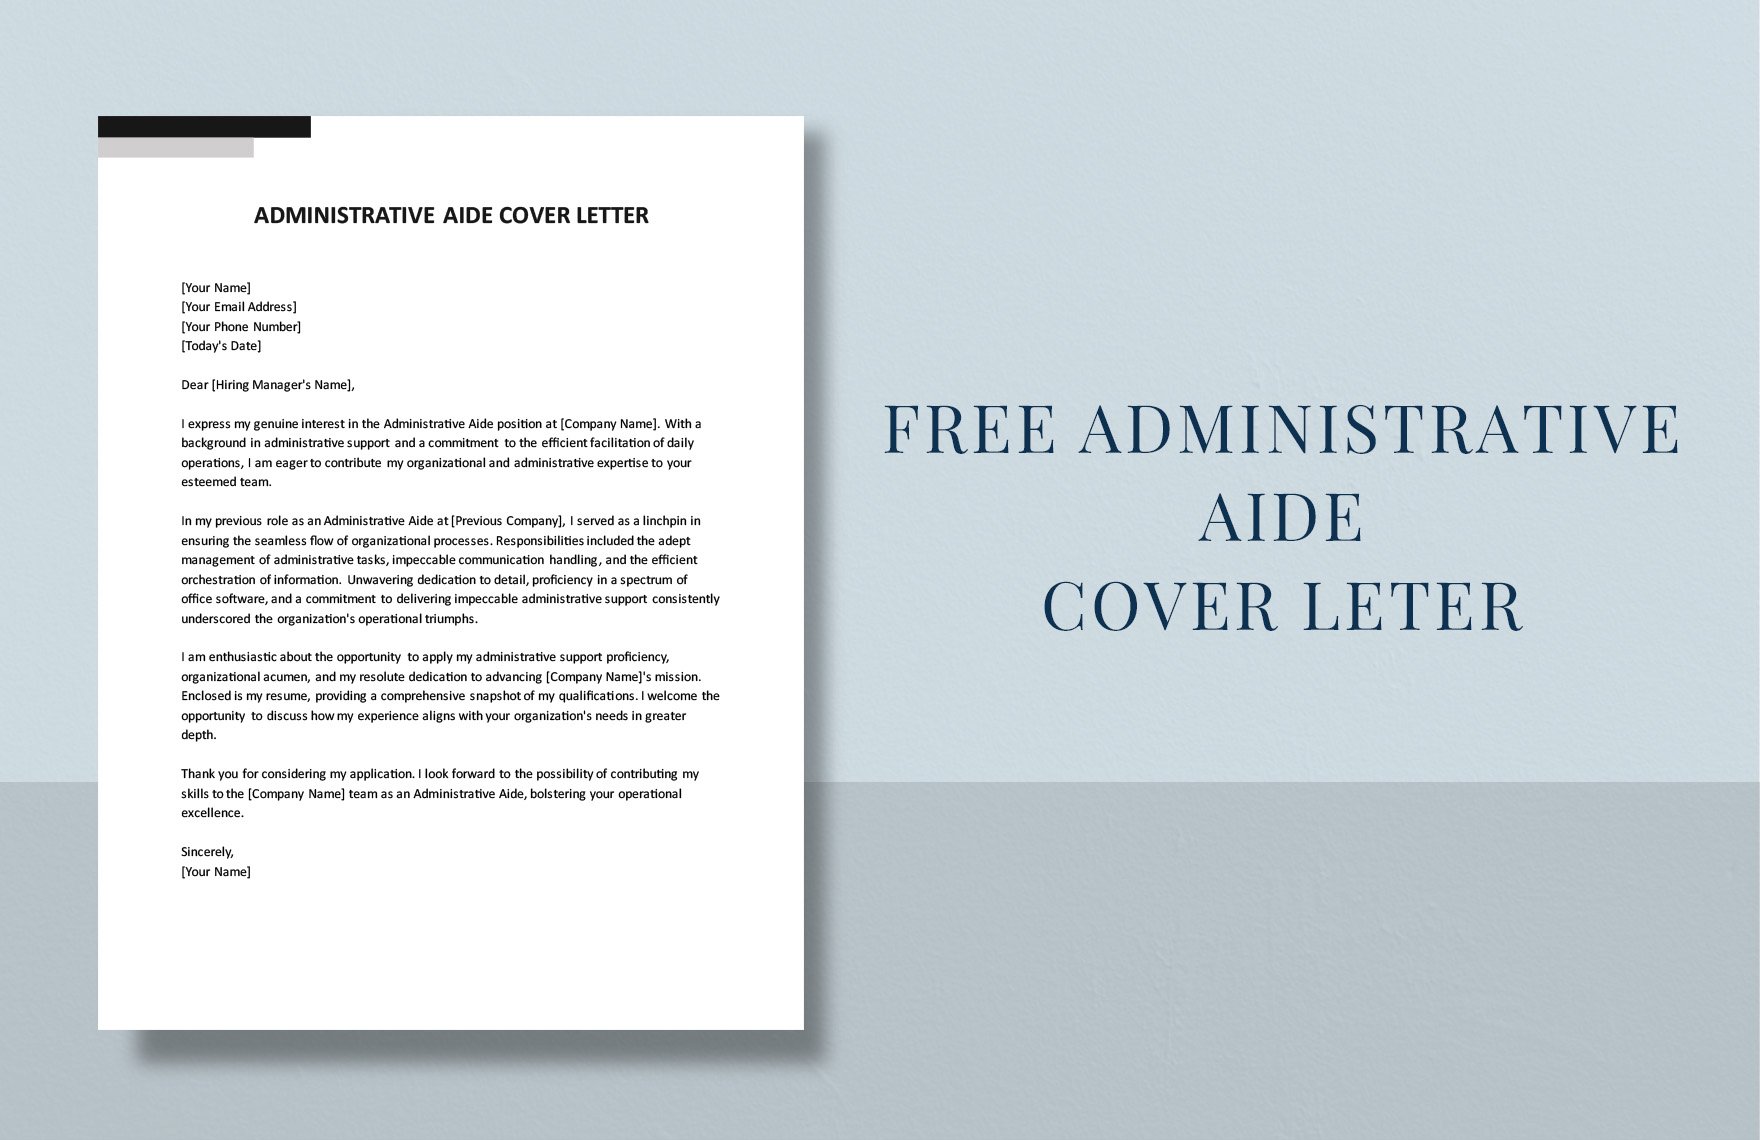 Administrative Aide Cover Letter